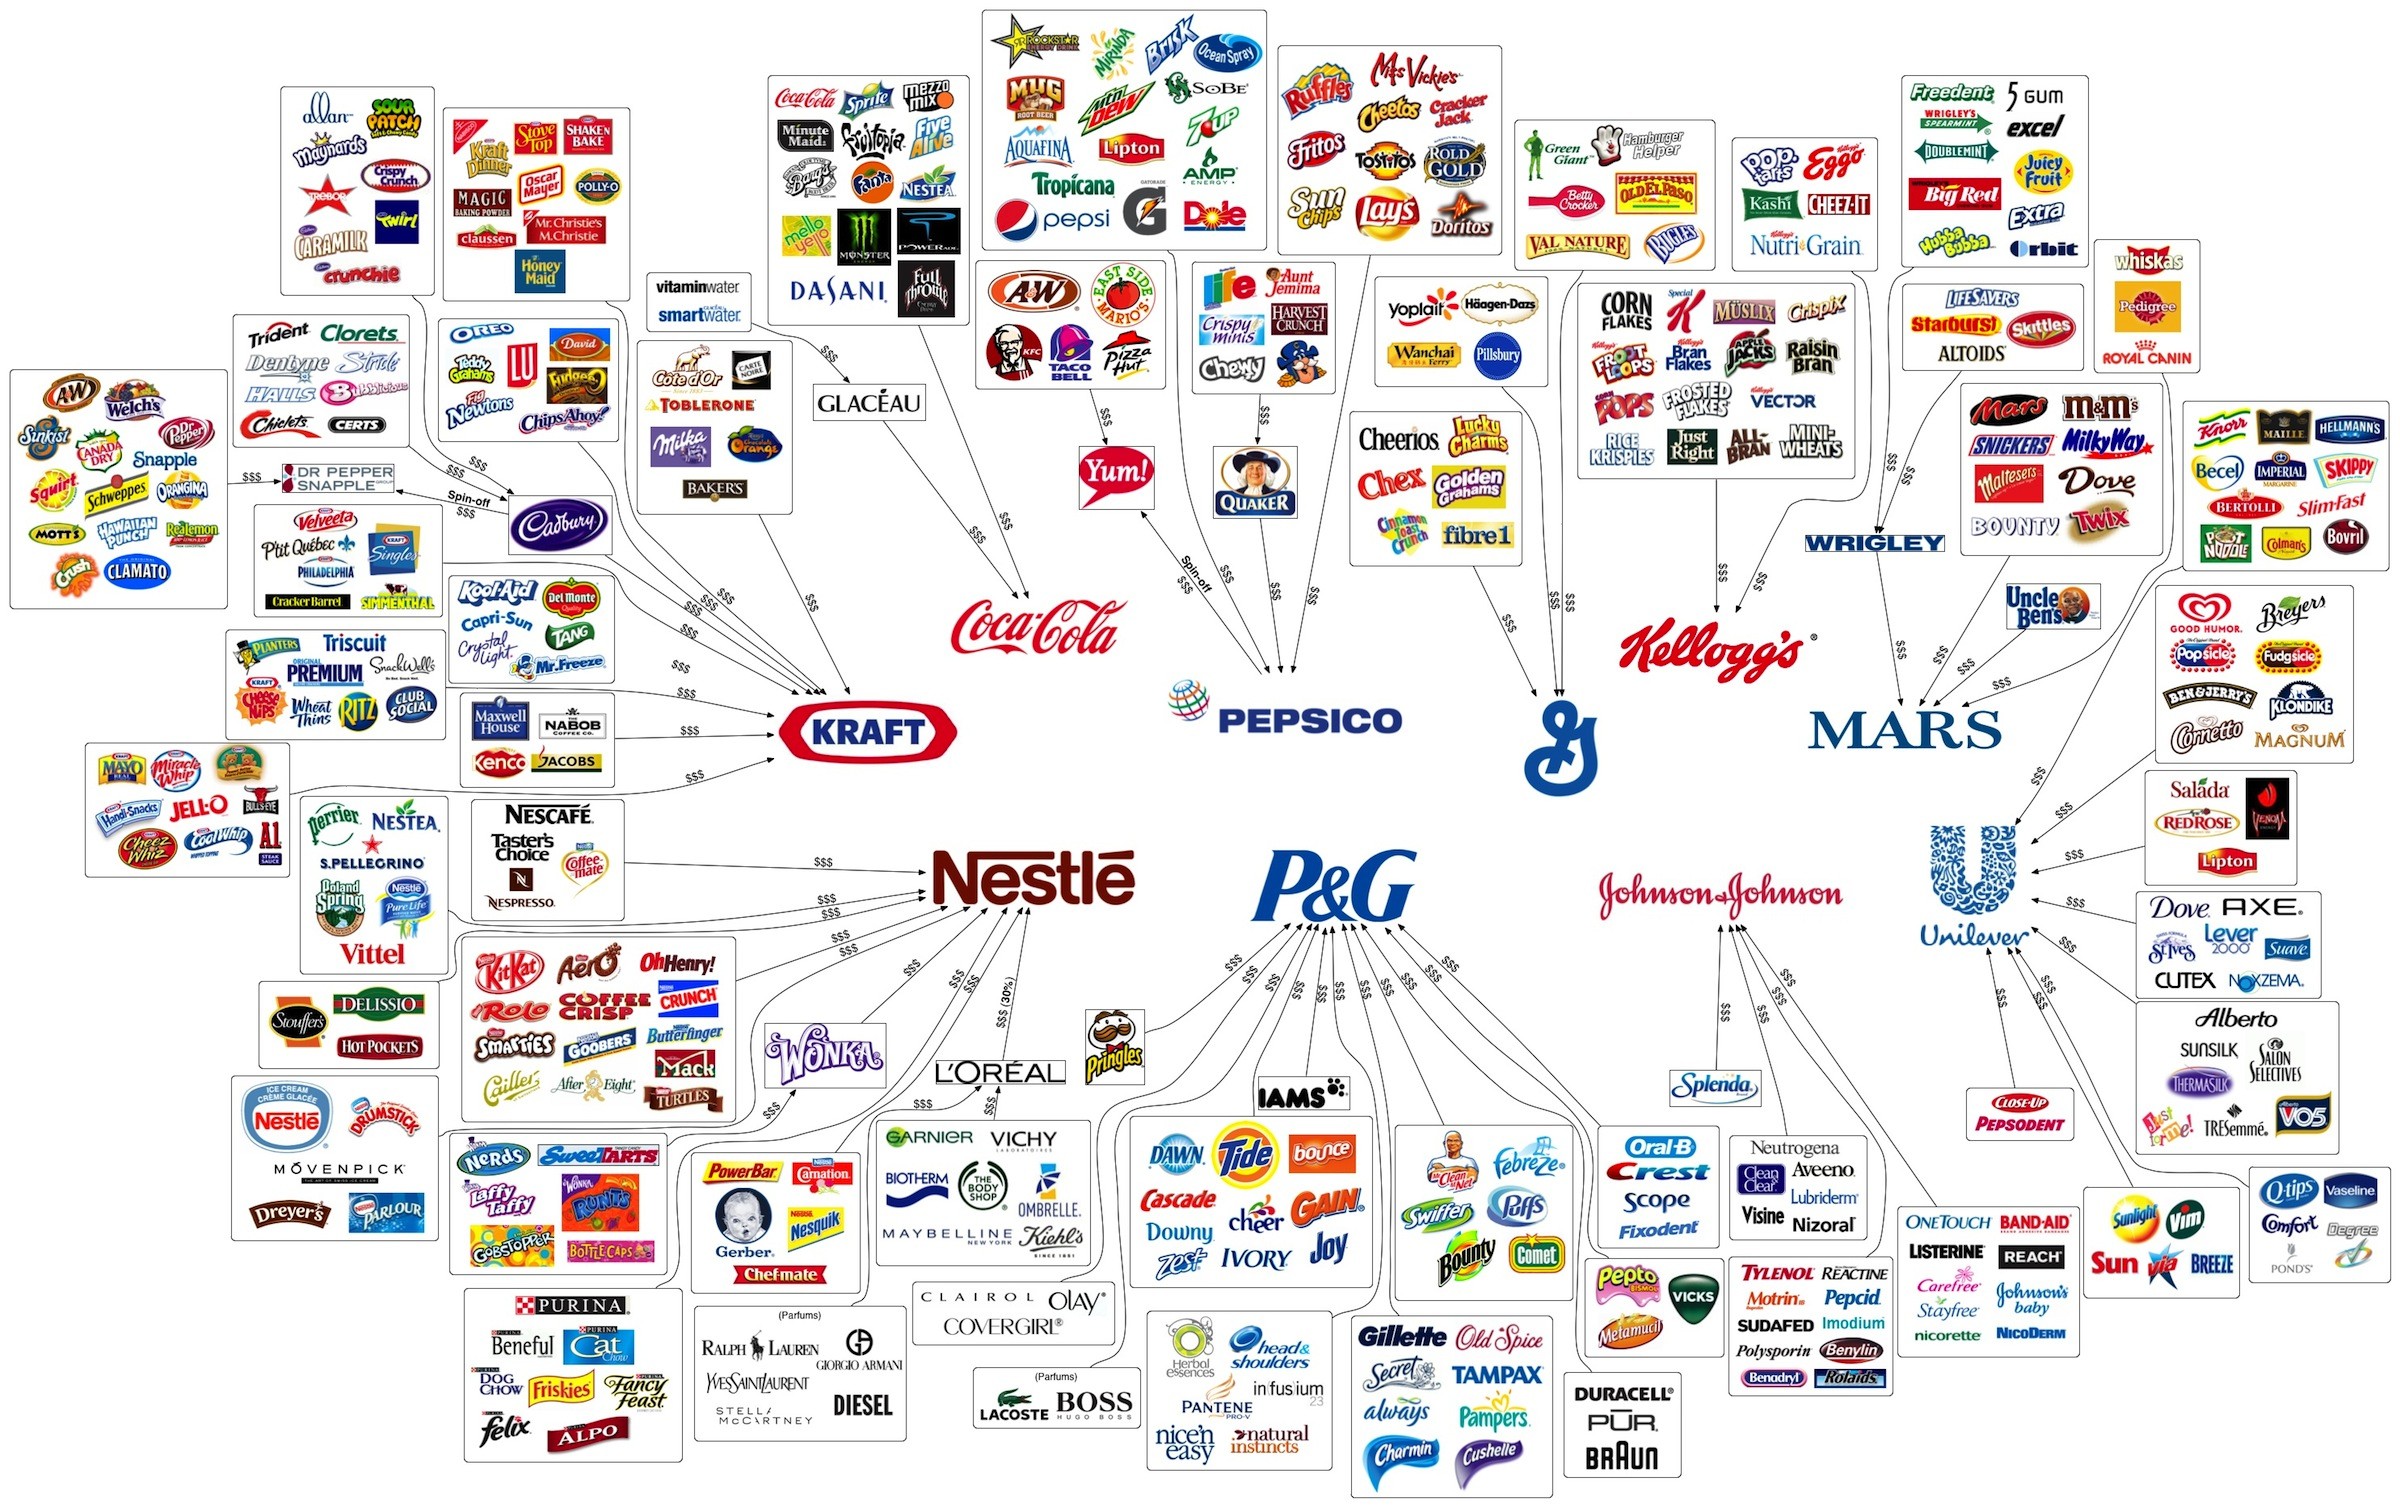 These 10 Companies Control Enormous Number Of Consumer Brands [GRAPHIC